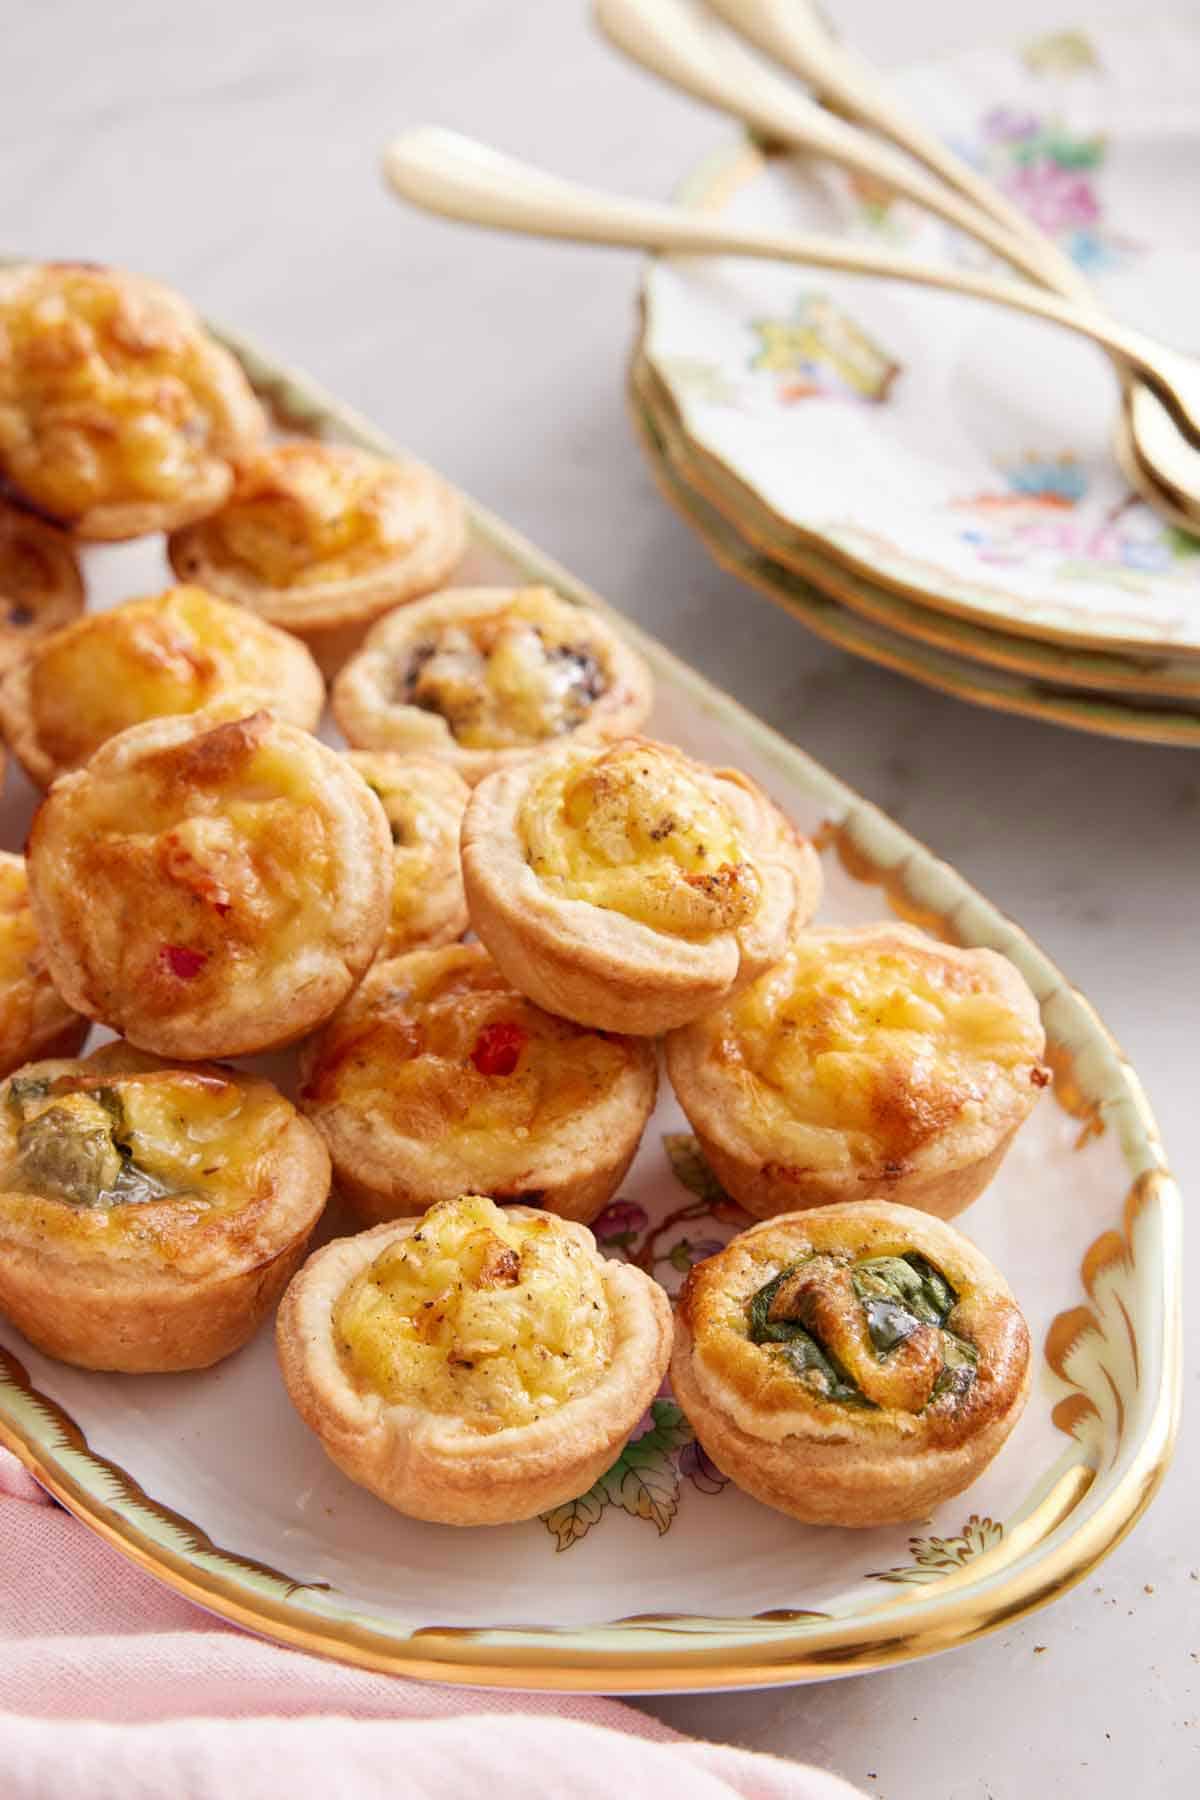 A platter of mini quiche with an assortment of fillings.